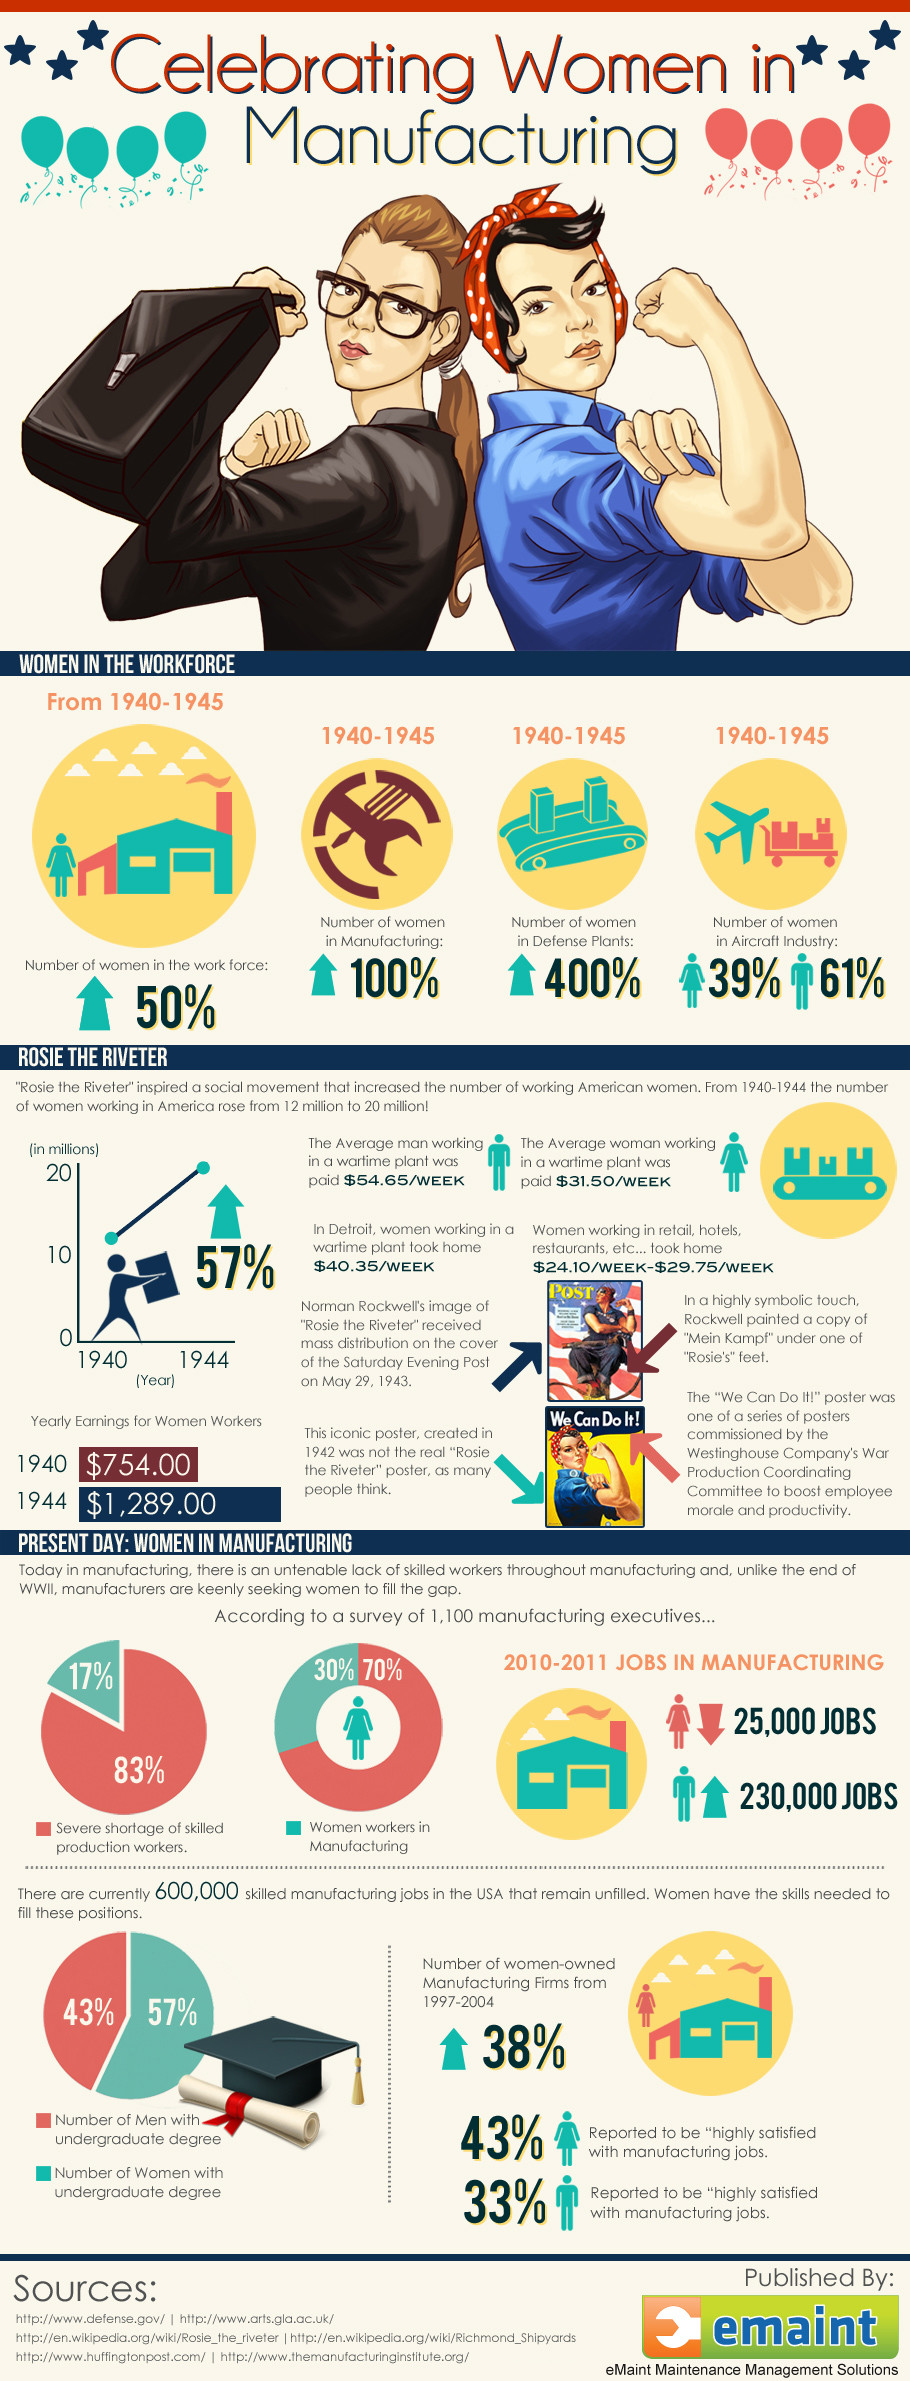 Celebrating women in manufacturing infographic